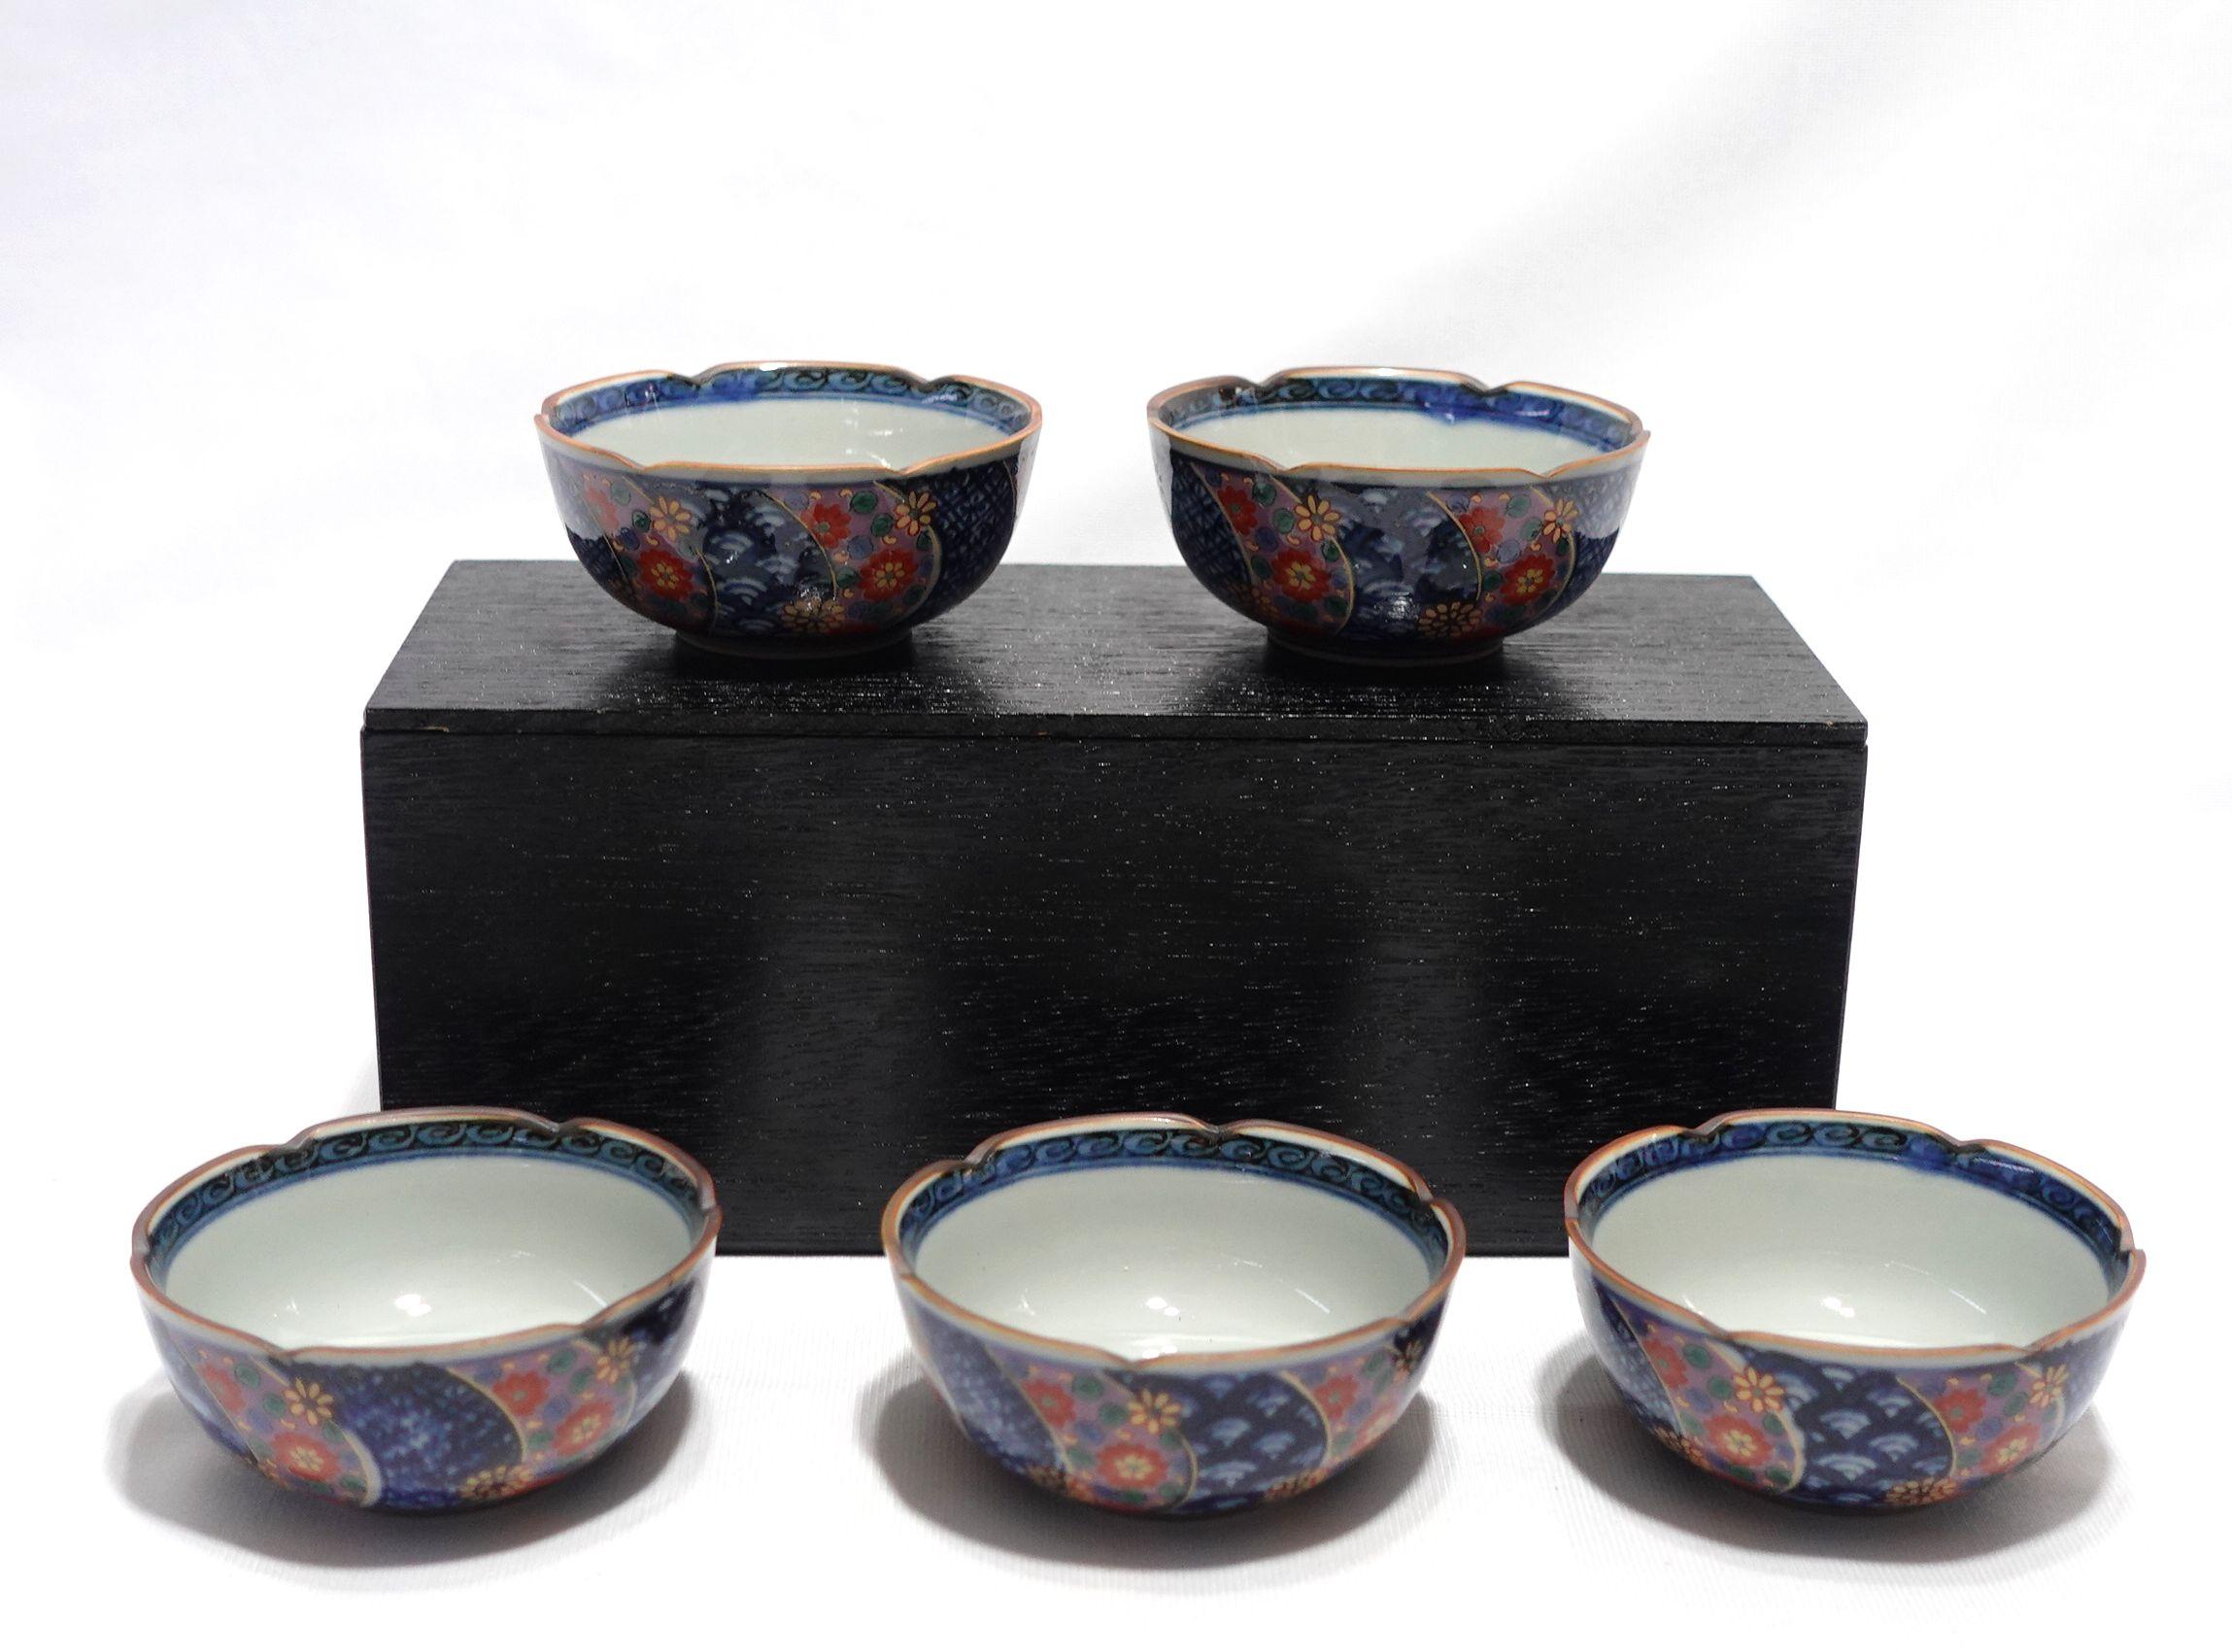 Five in the original box from an old storage and in new condition, footed bowls measure 3.25